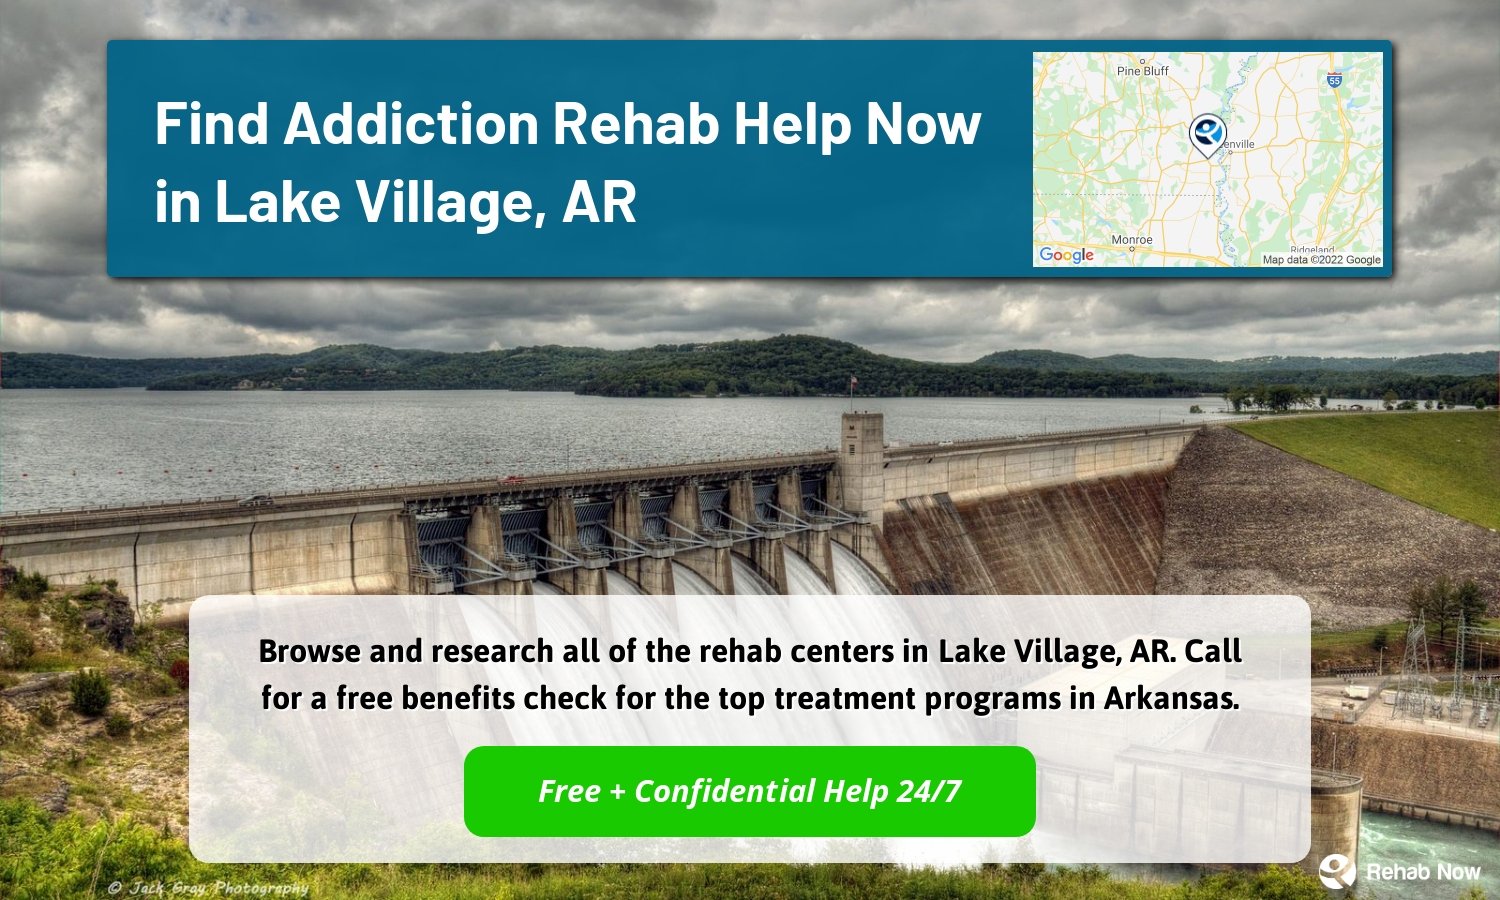 Browse and research all of the rehab centers in Lake Village, AR. Call for a free benefits check for the top treatment programs in Arkansas.